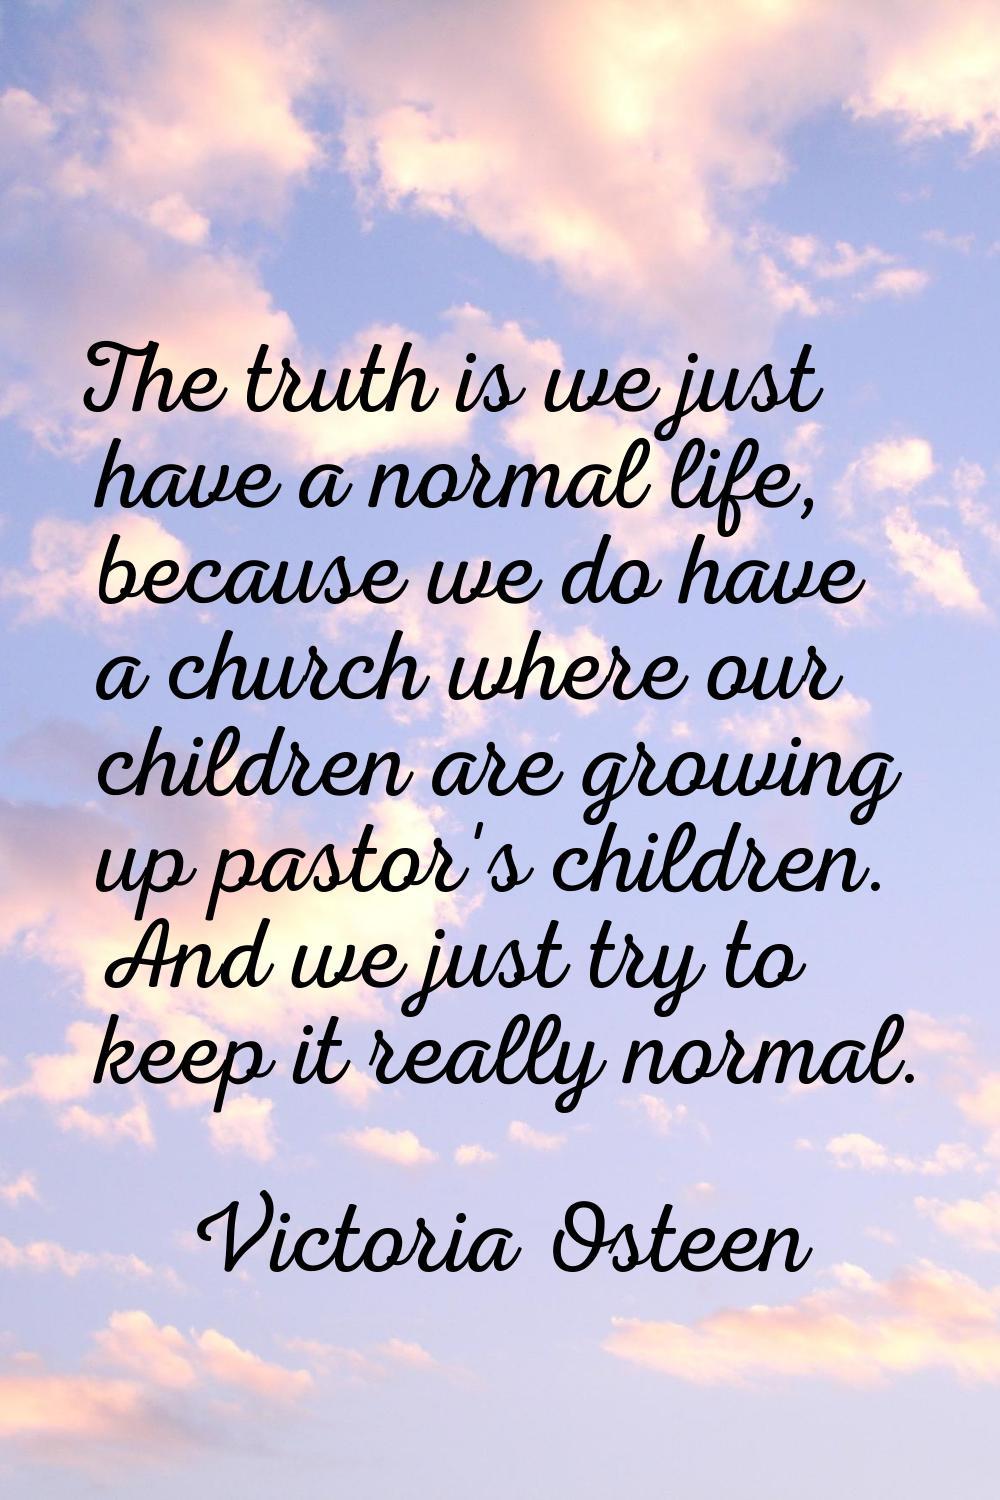 The truth is we just have a normal life, because we do have a church where our children are growing